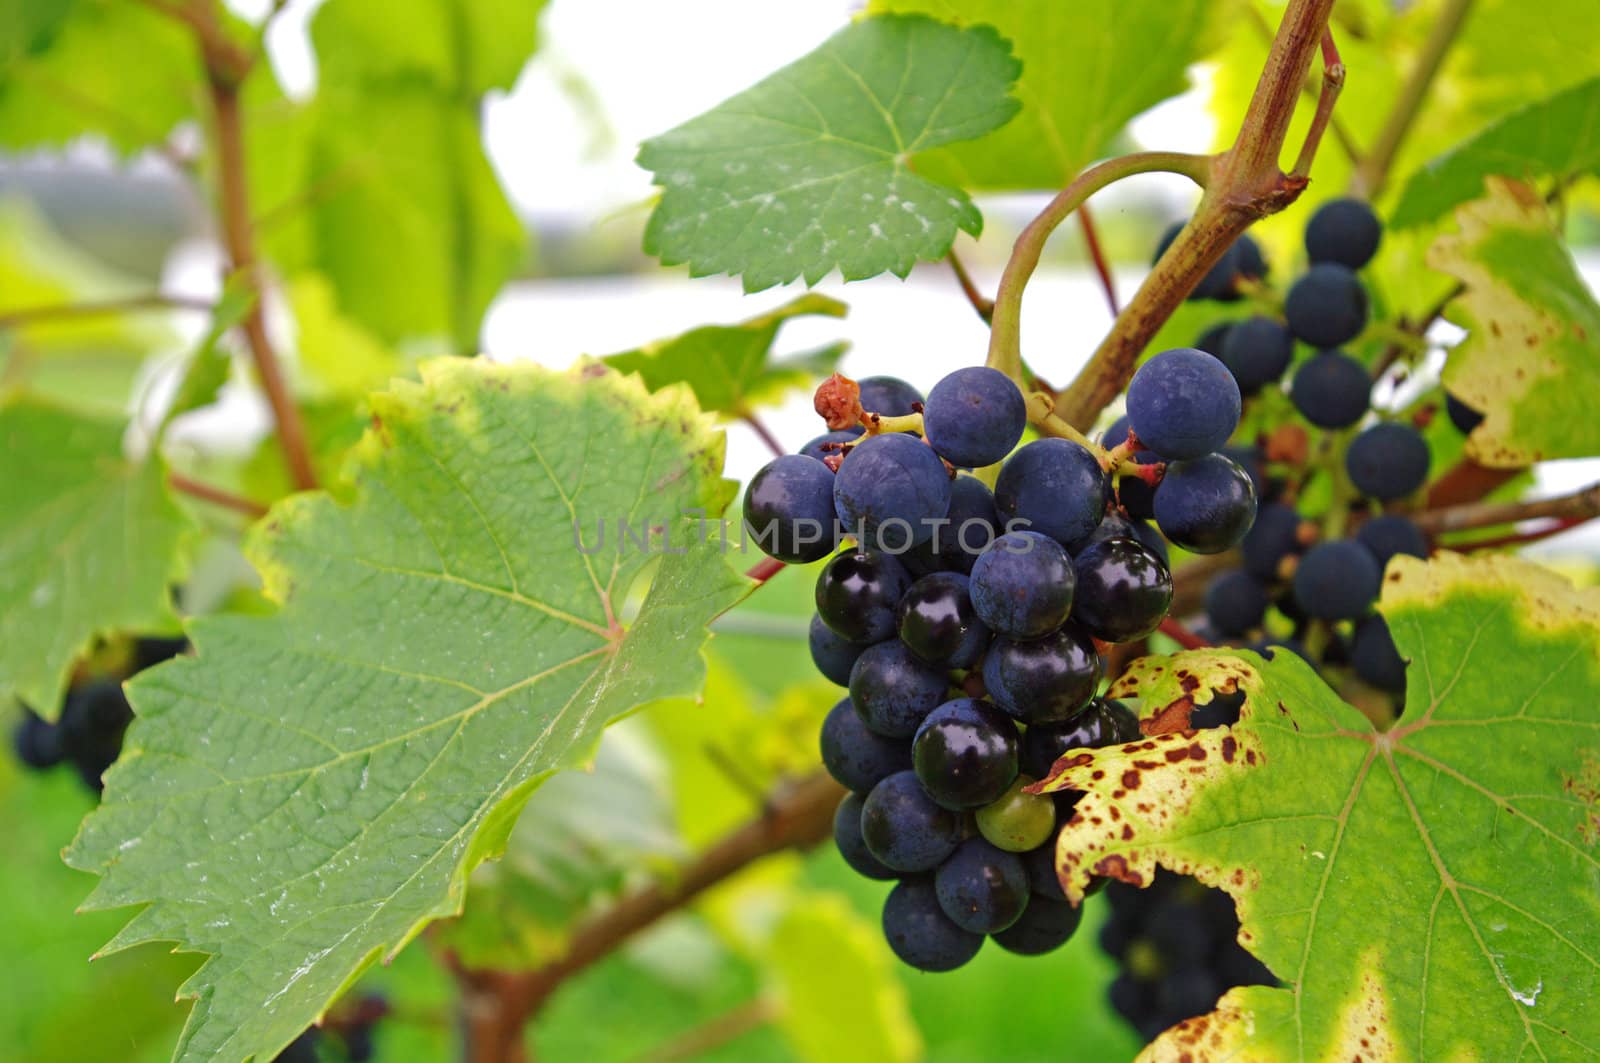 Grapes on the vine by edcorey